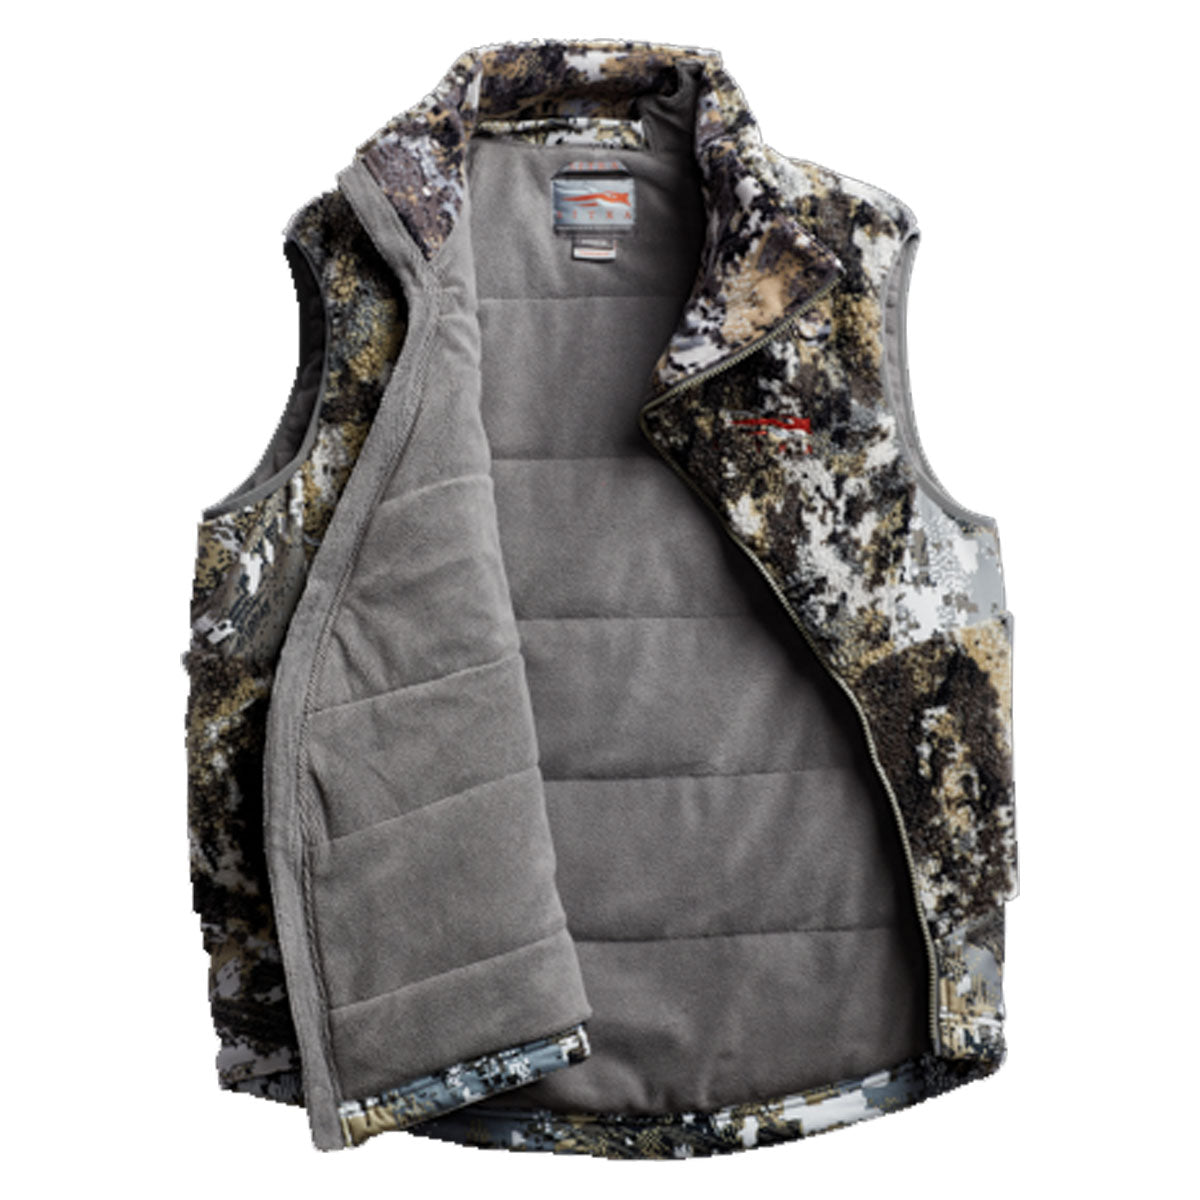 Sitka Fanatic Vest in  by GOHUNT | Sitka - GOHUNT Shop